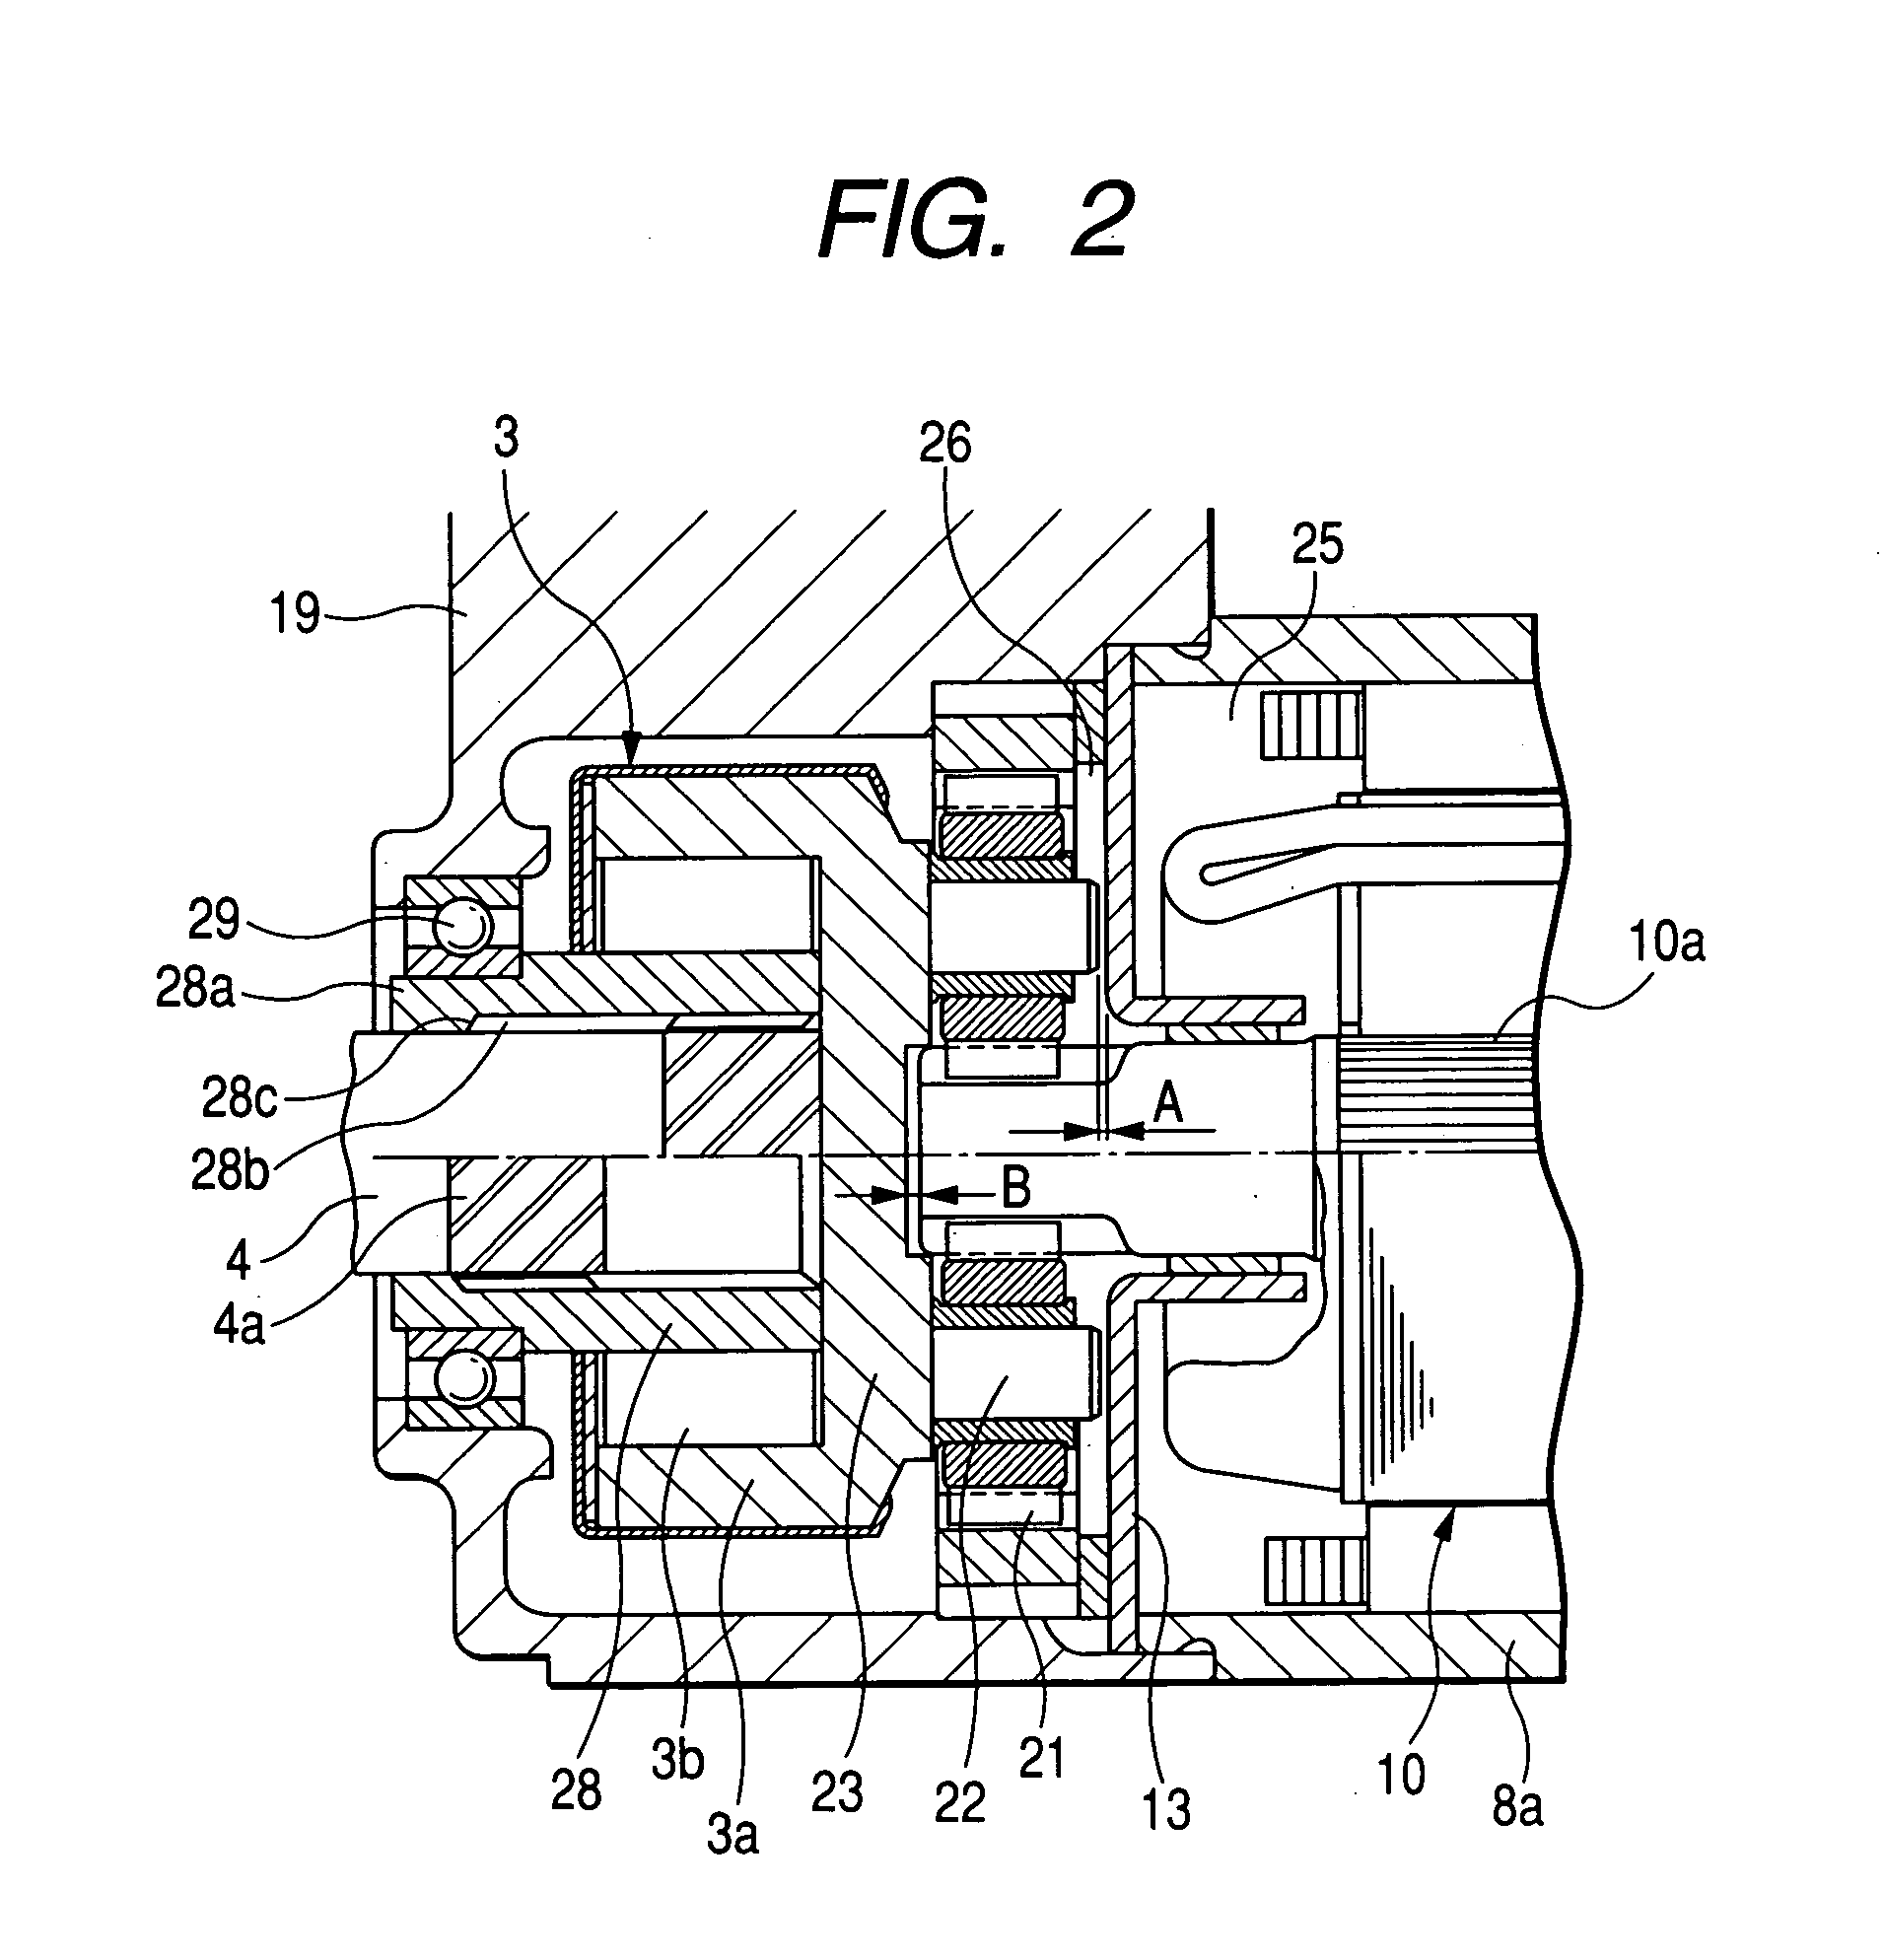 Structure of engine starter equipped with planetary gear speed reducer